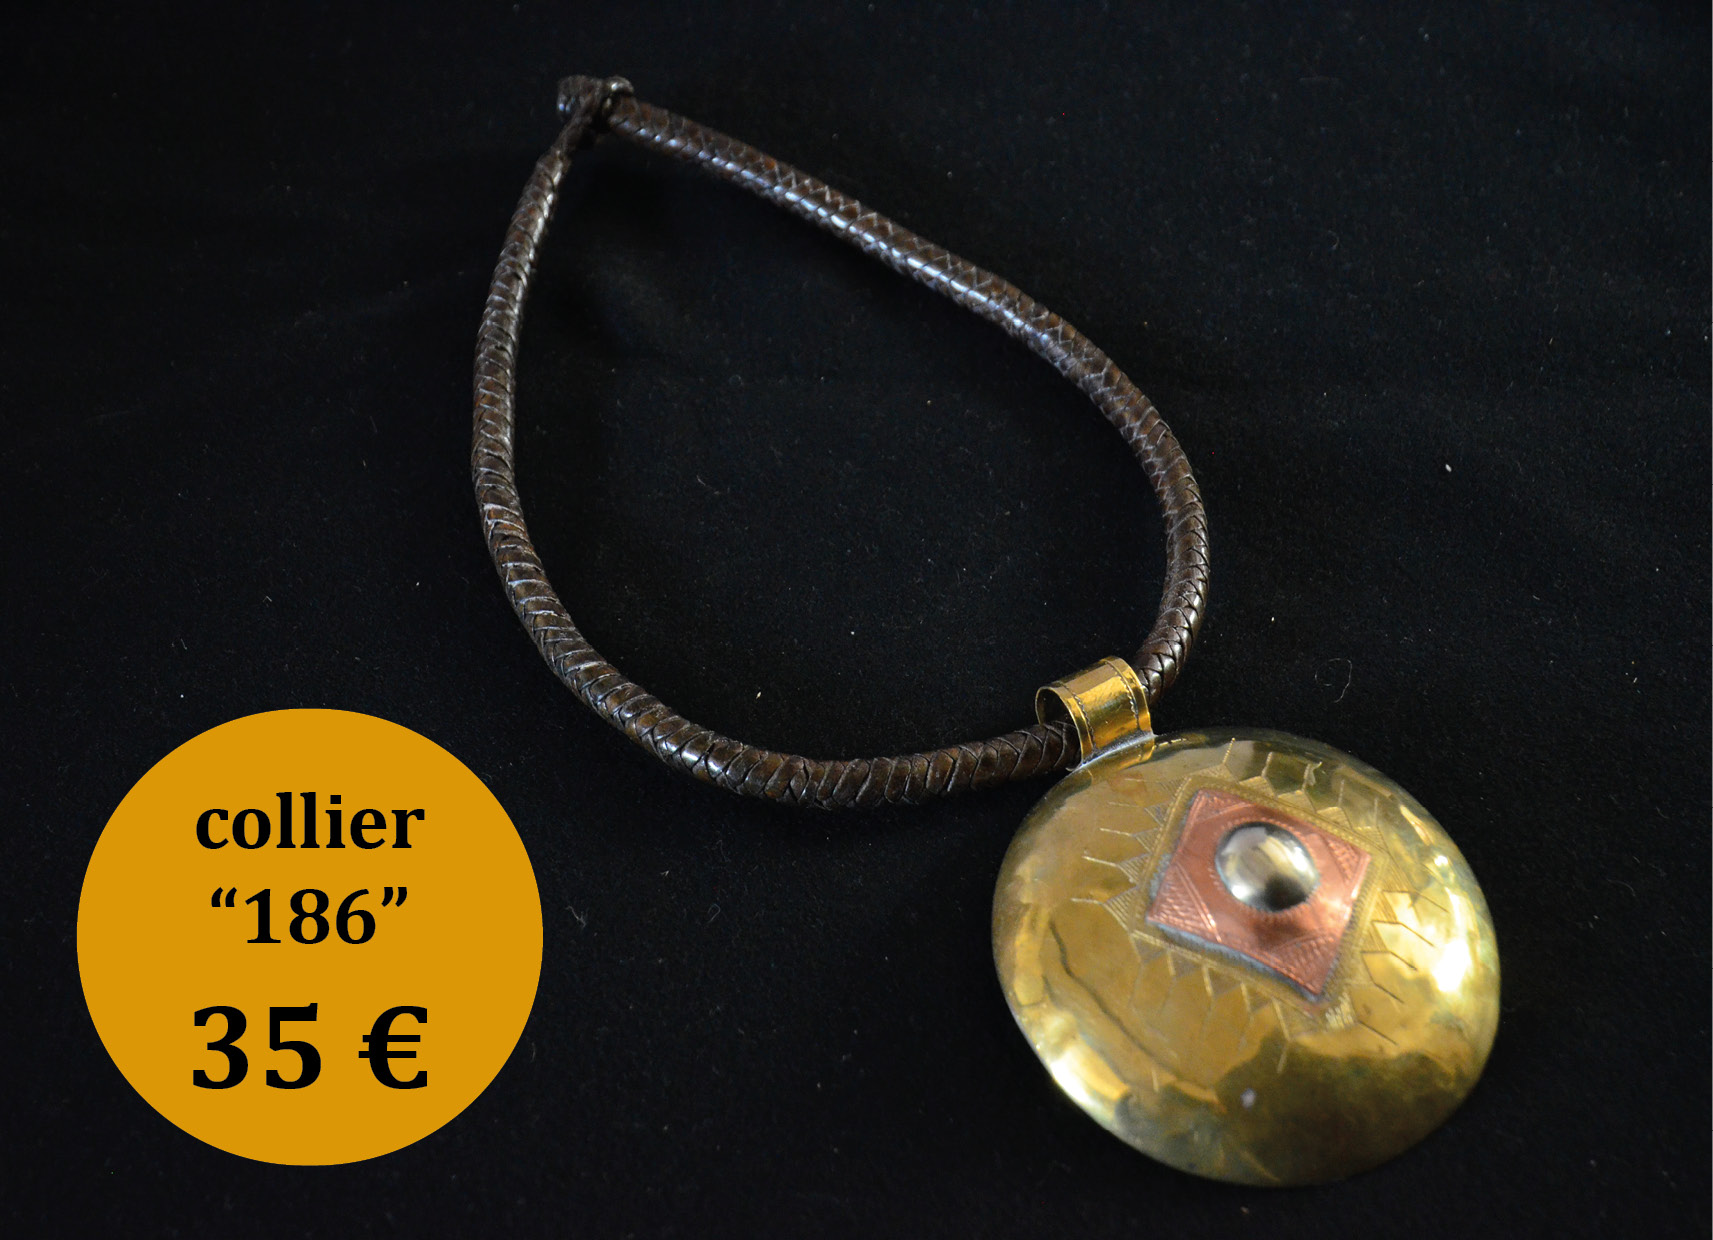 Collier "186"